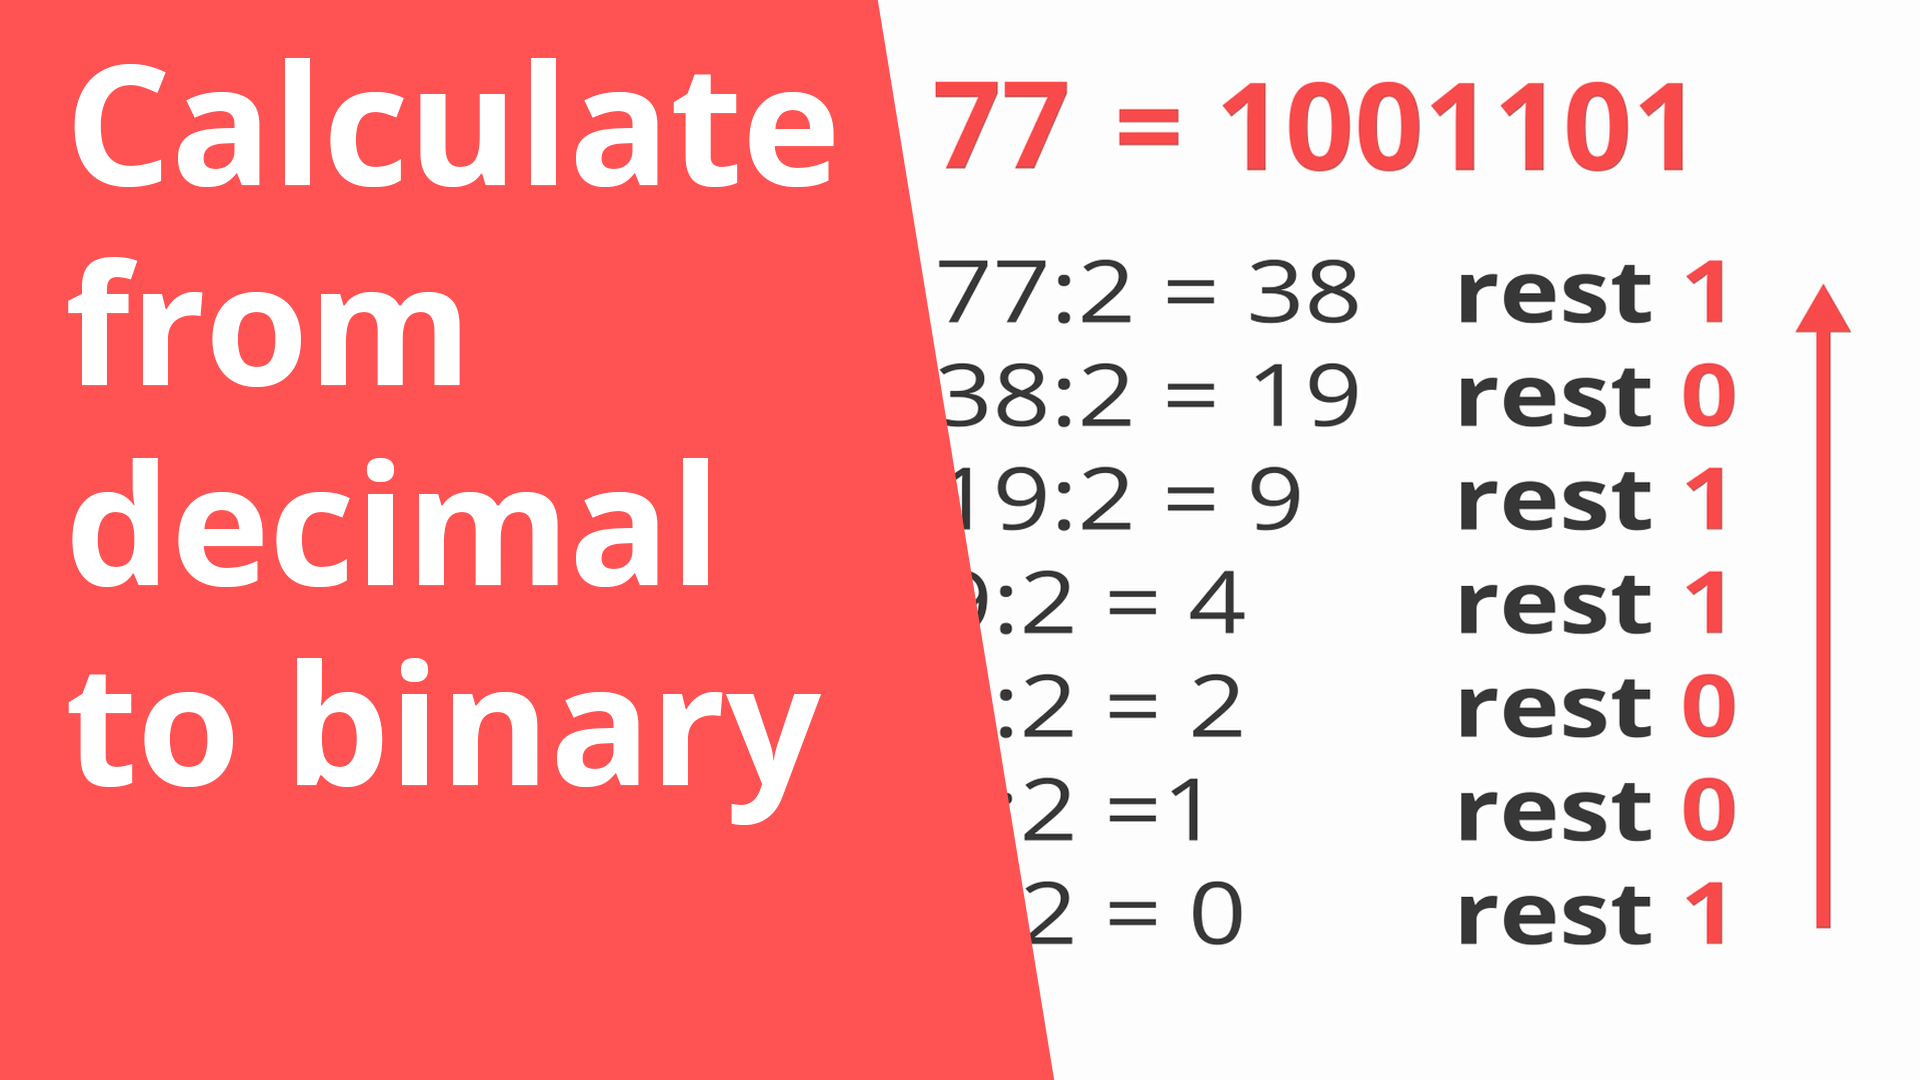 Calculate from decimal to binary